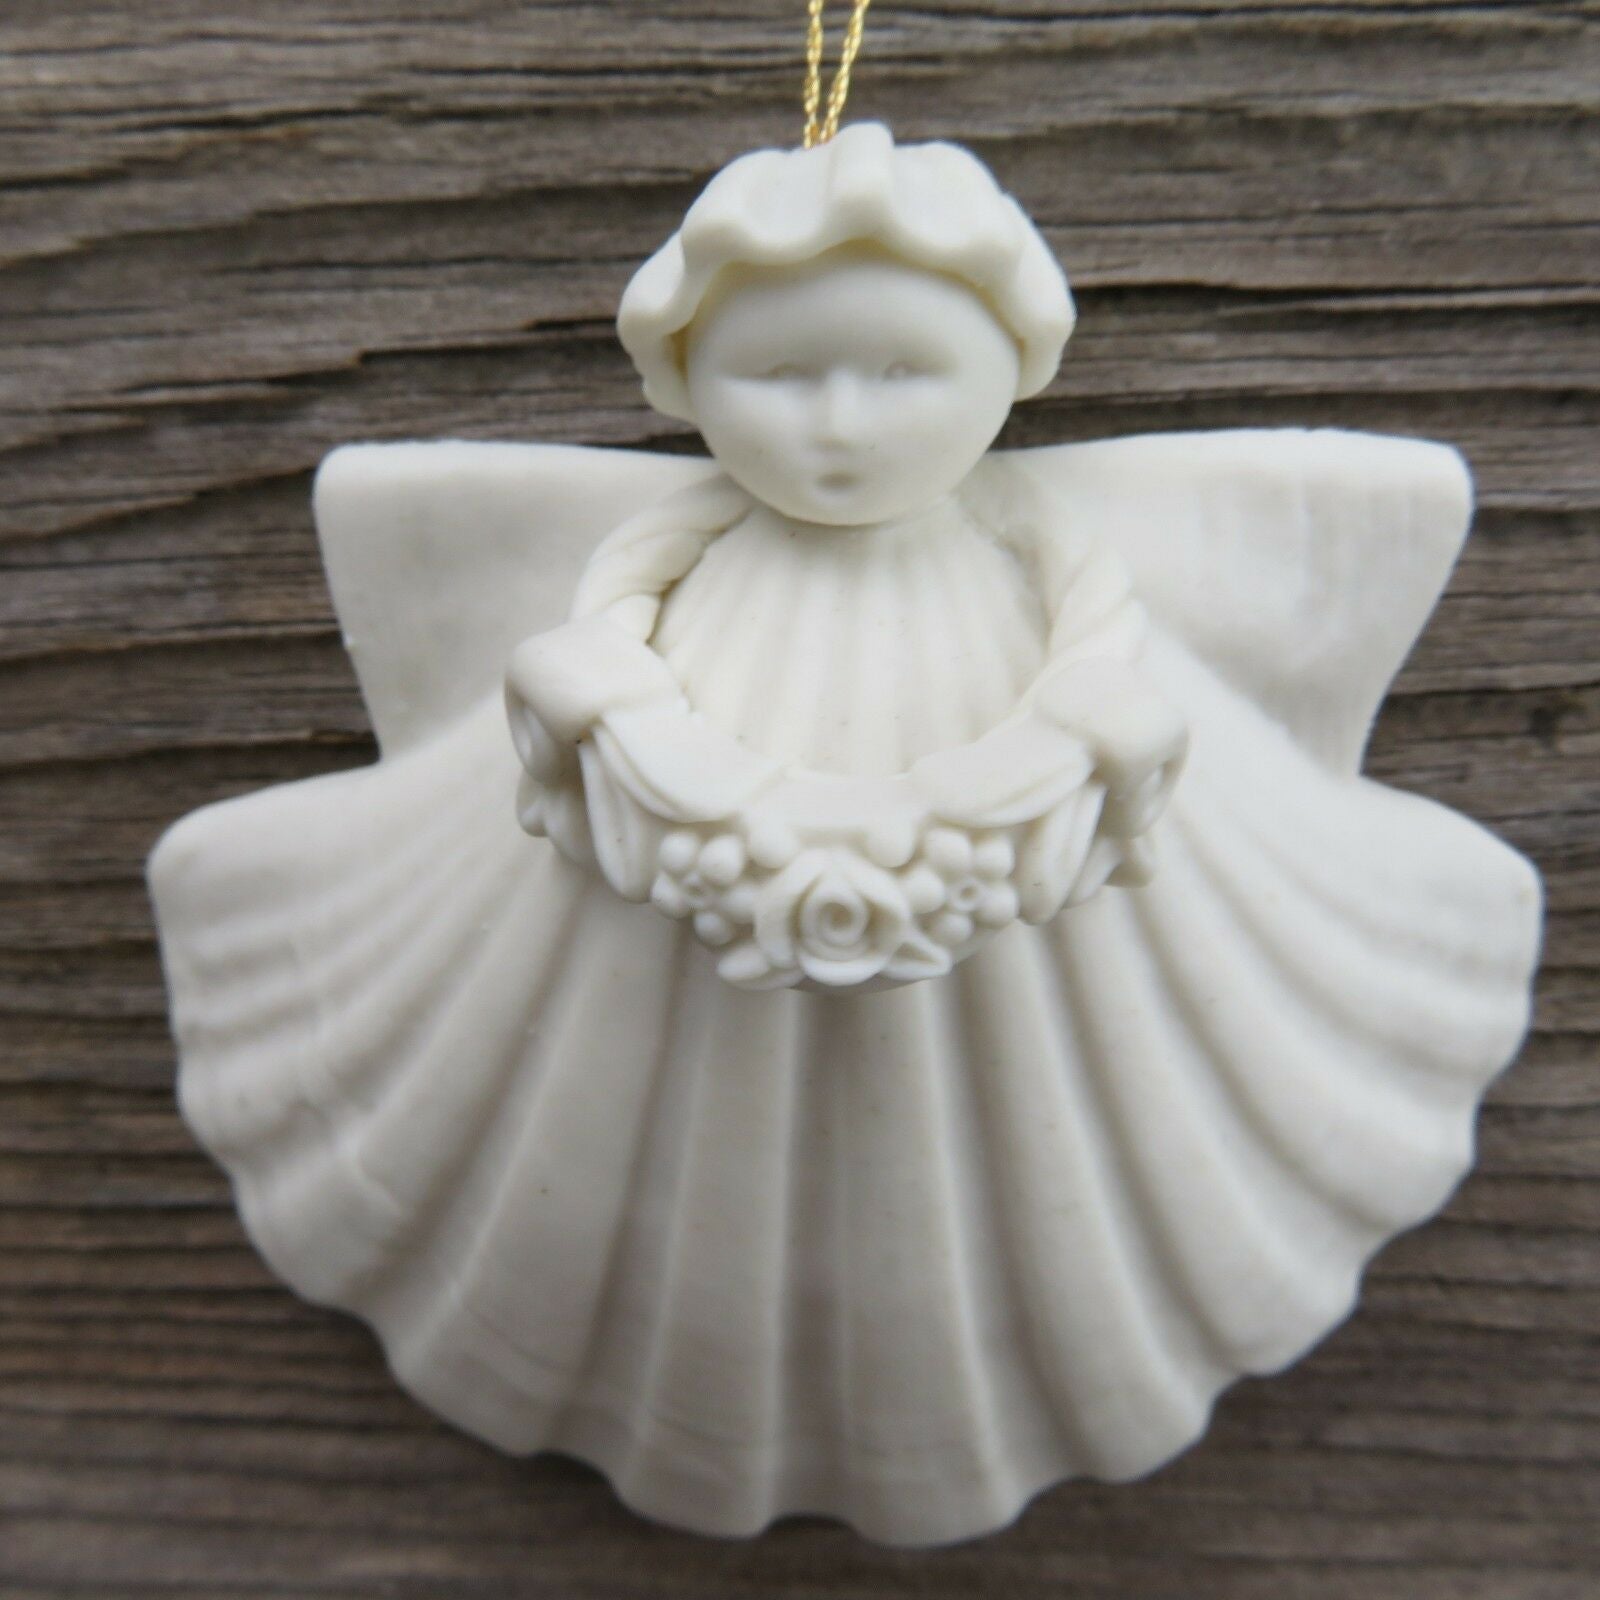 Shell Angel Garland Ornament Vintage Christmas Margaret Furlong 1995 Bisque 3 In - At Grandma's Table